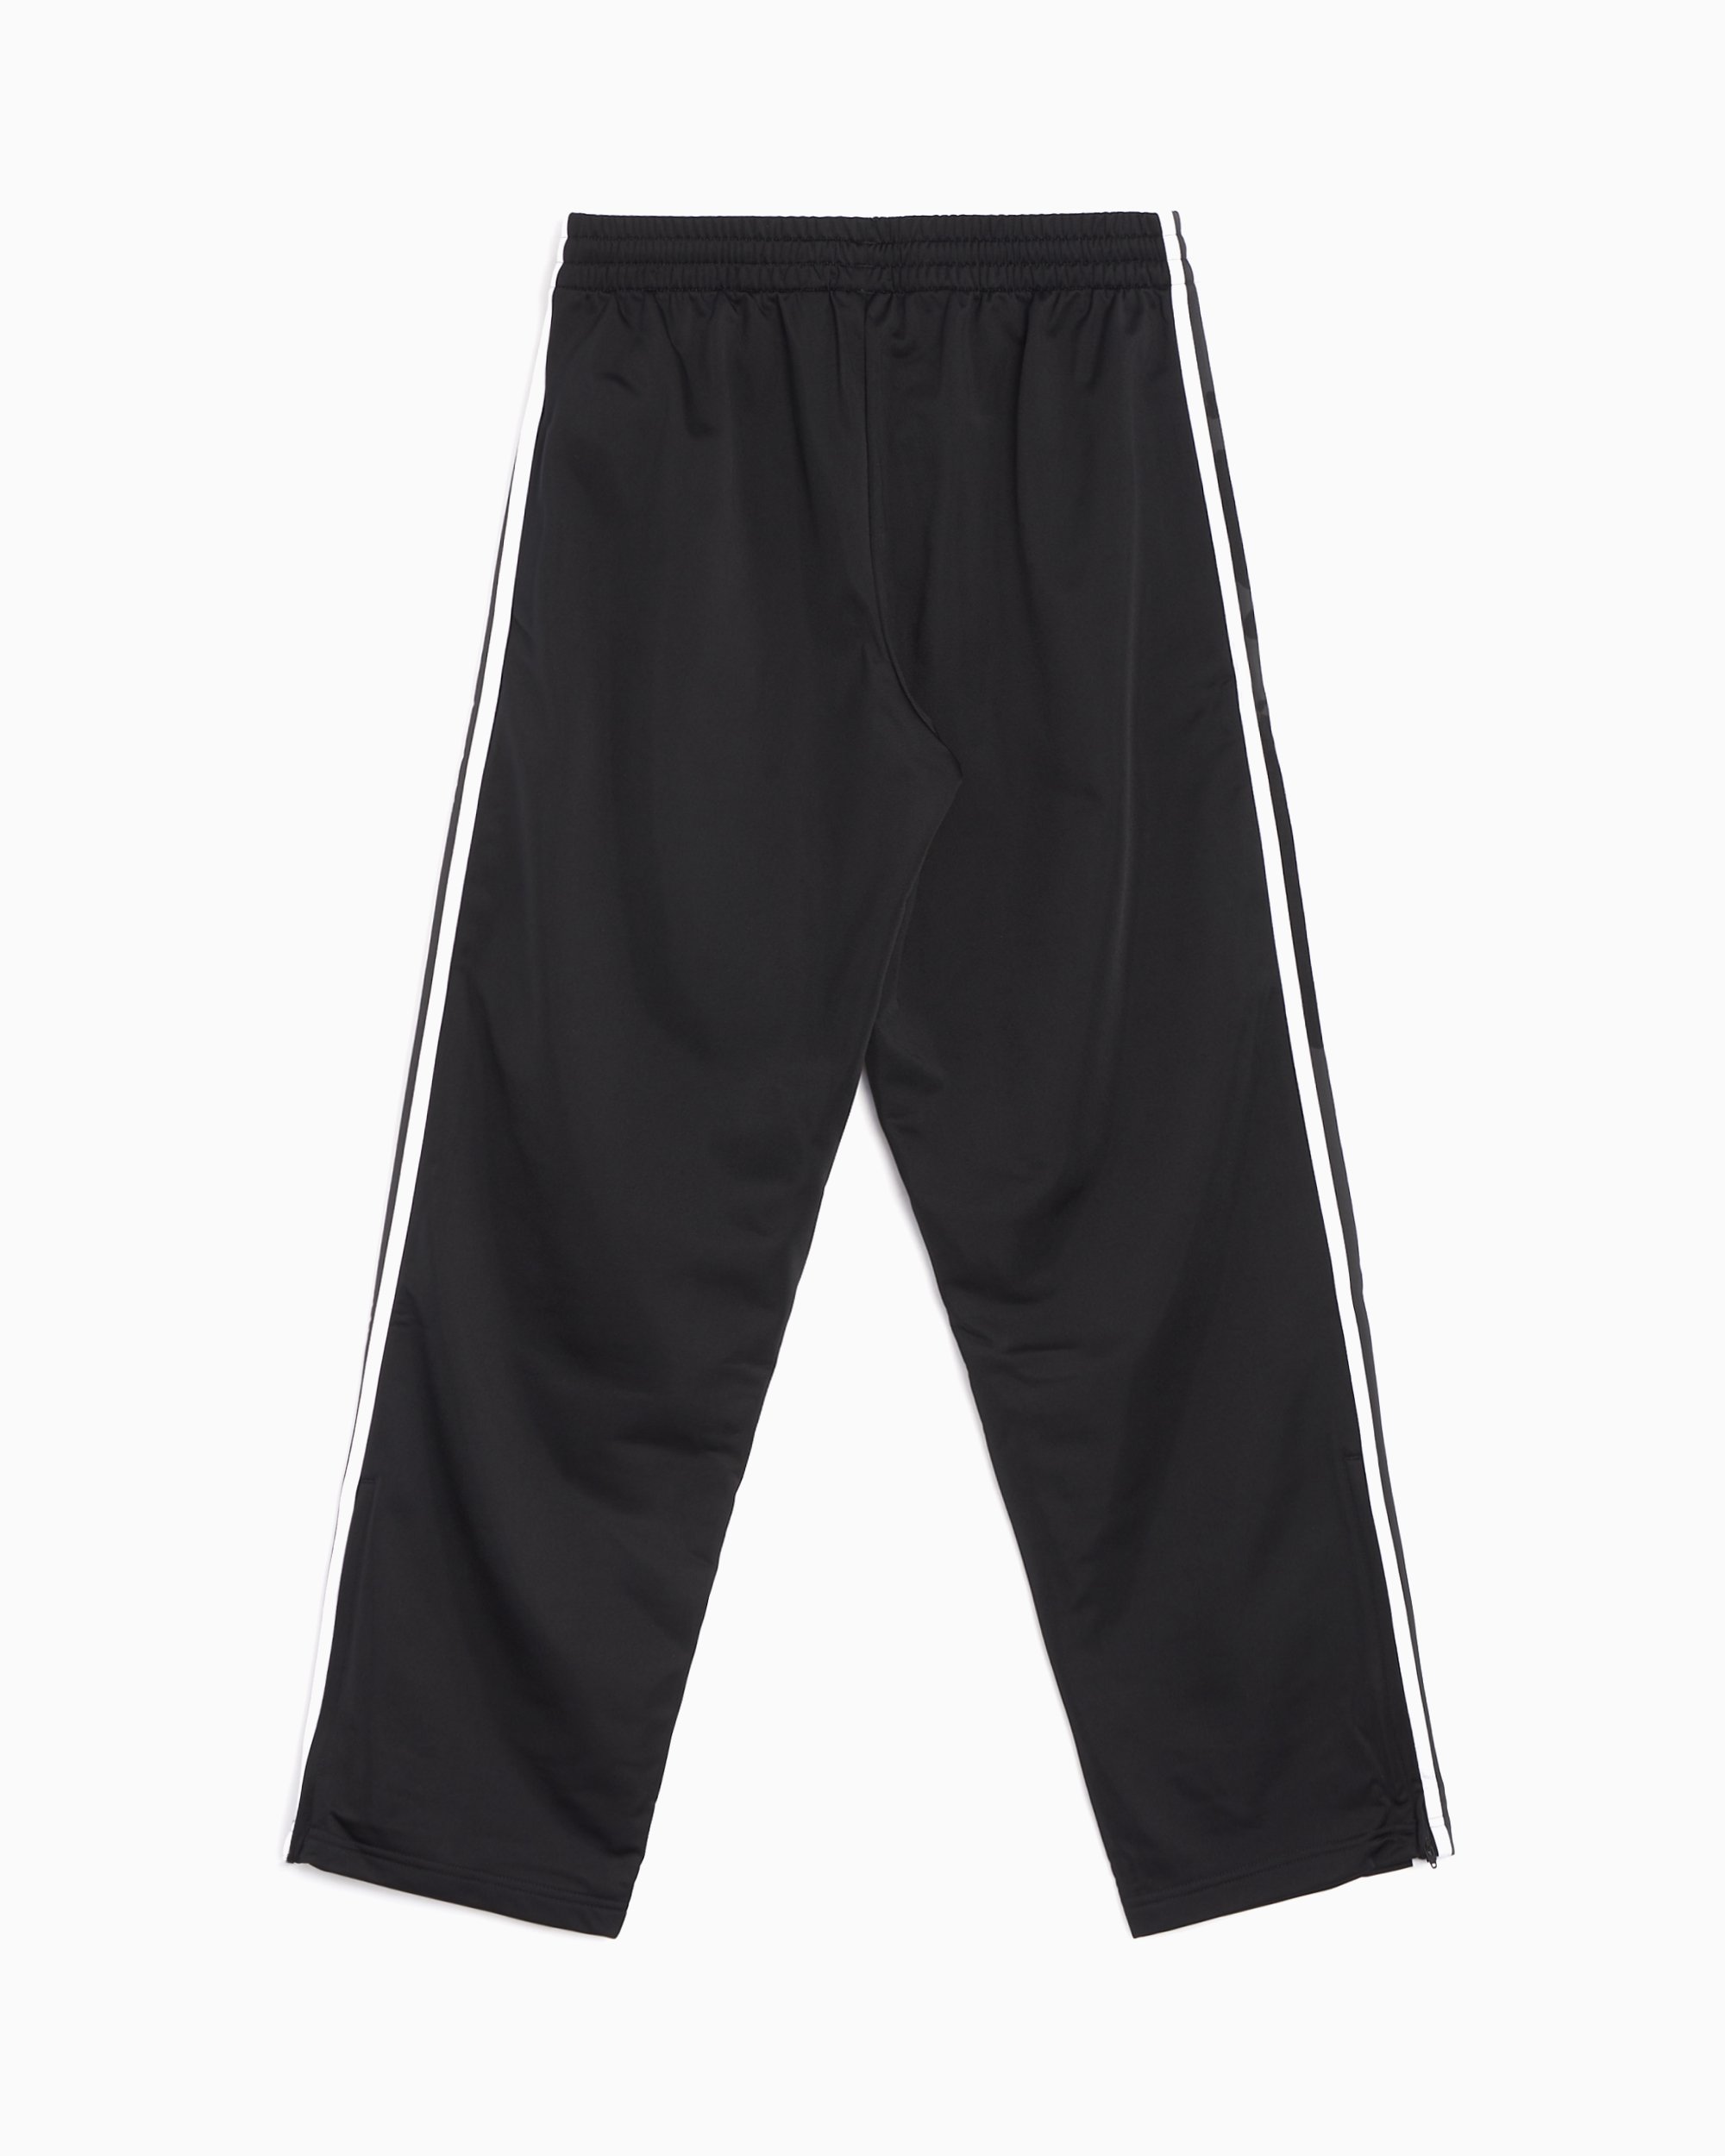 Adicolor recycled leggings with split bottoms and high waist, black, Adidas  Originals